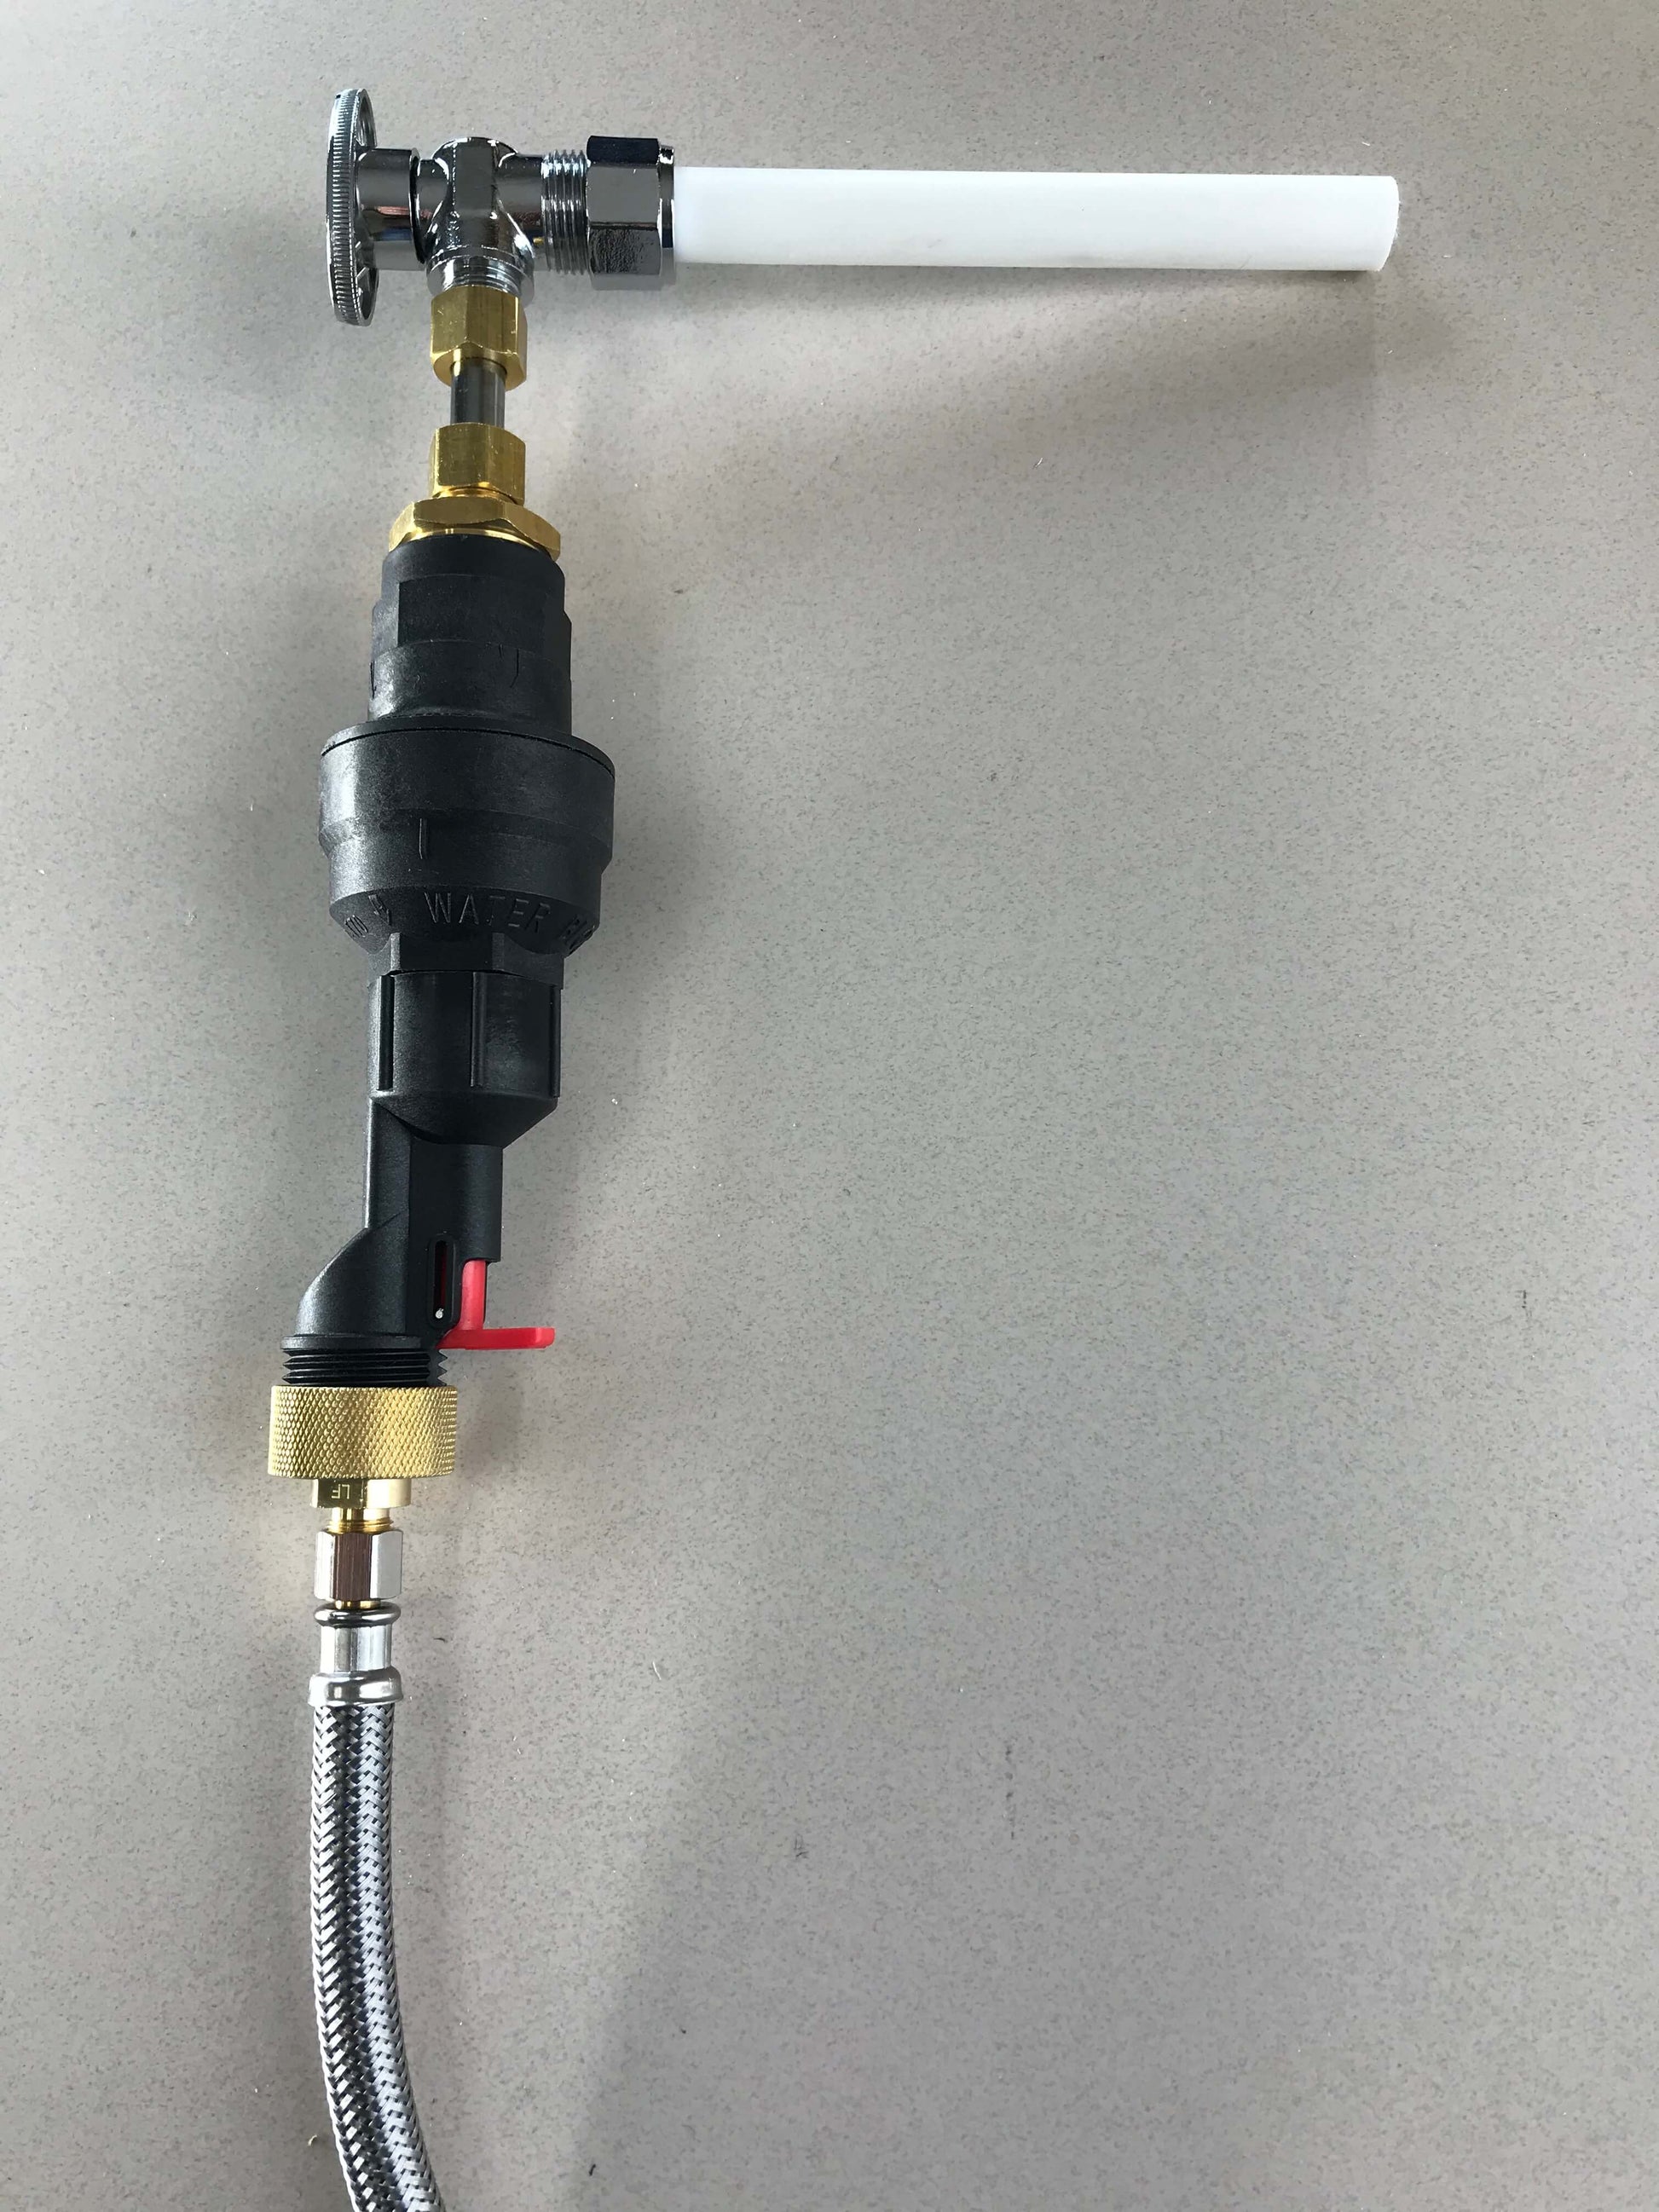 Water Block, Water Block Reset Device, 1/4" John Guest Quick Connect, and 1/4" water supply line fitting connected to a copper supply line and a supply hose, protecting a home from water damage caused by leaks and floods.